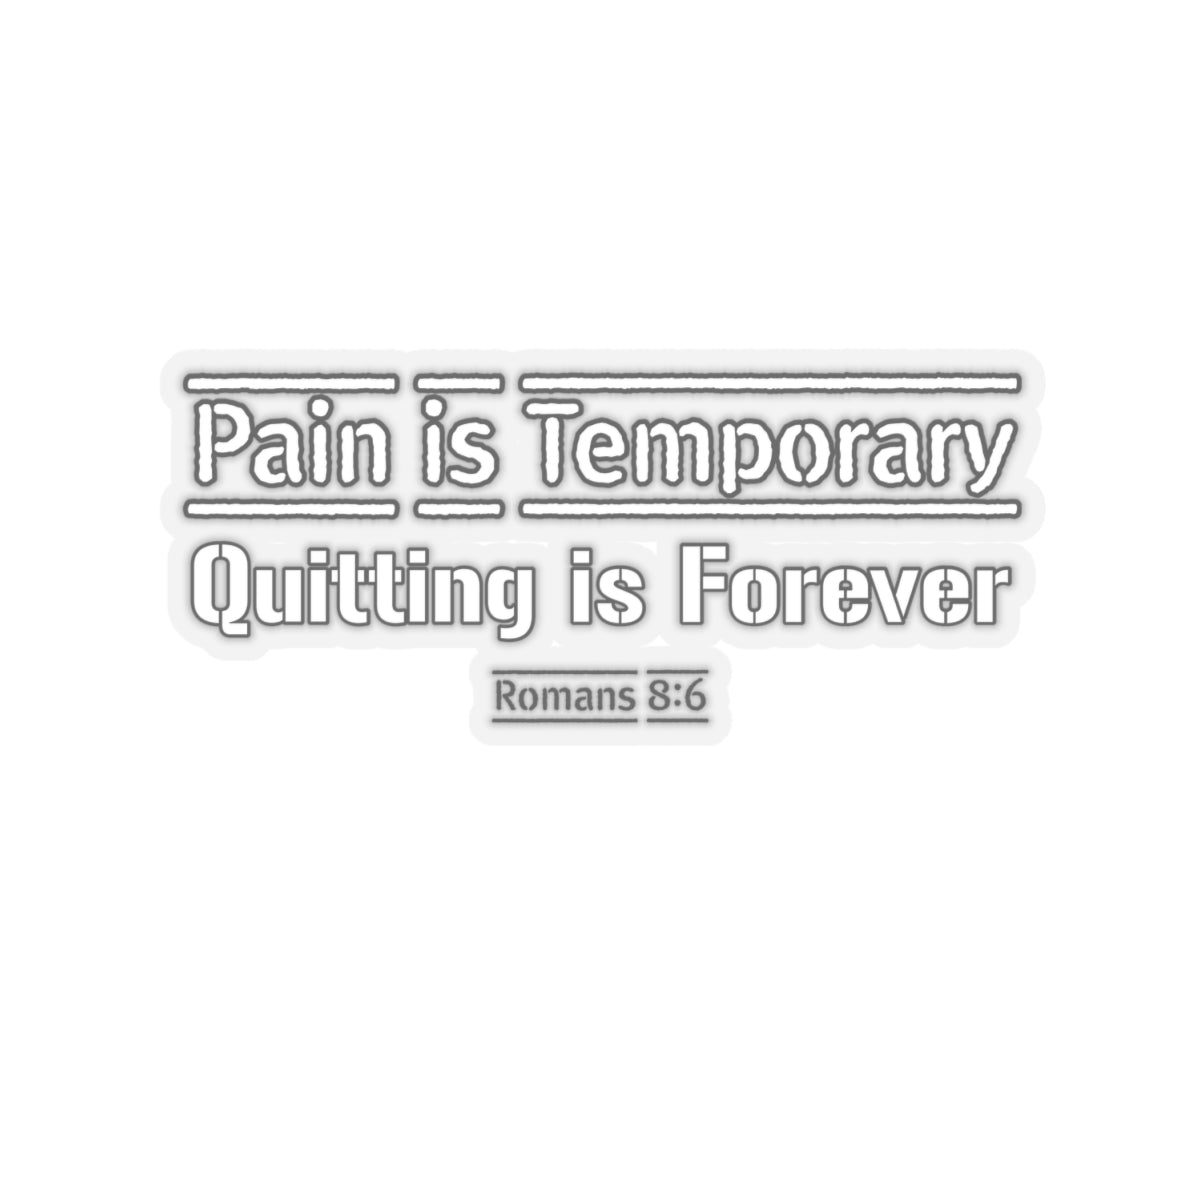 PAIN IS TEMPORARY Decal/Sticker - The Bible Junkies®